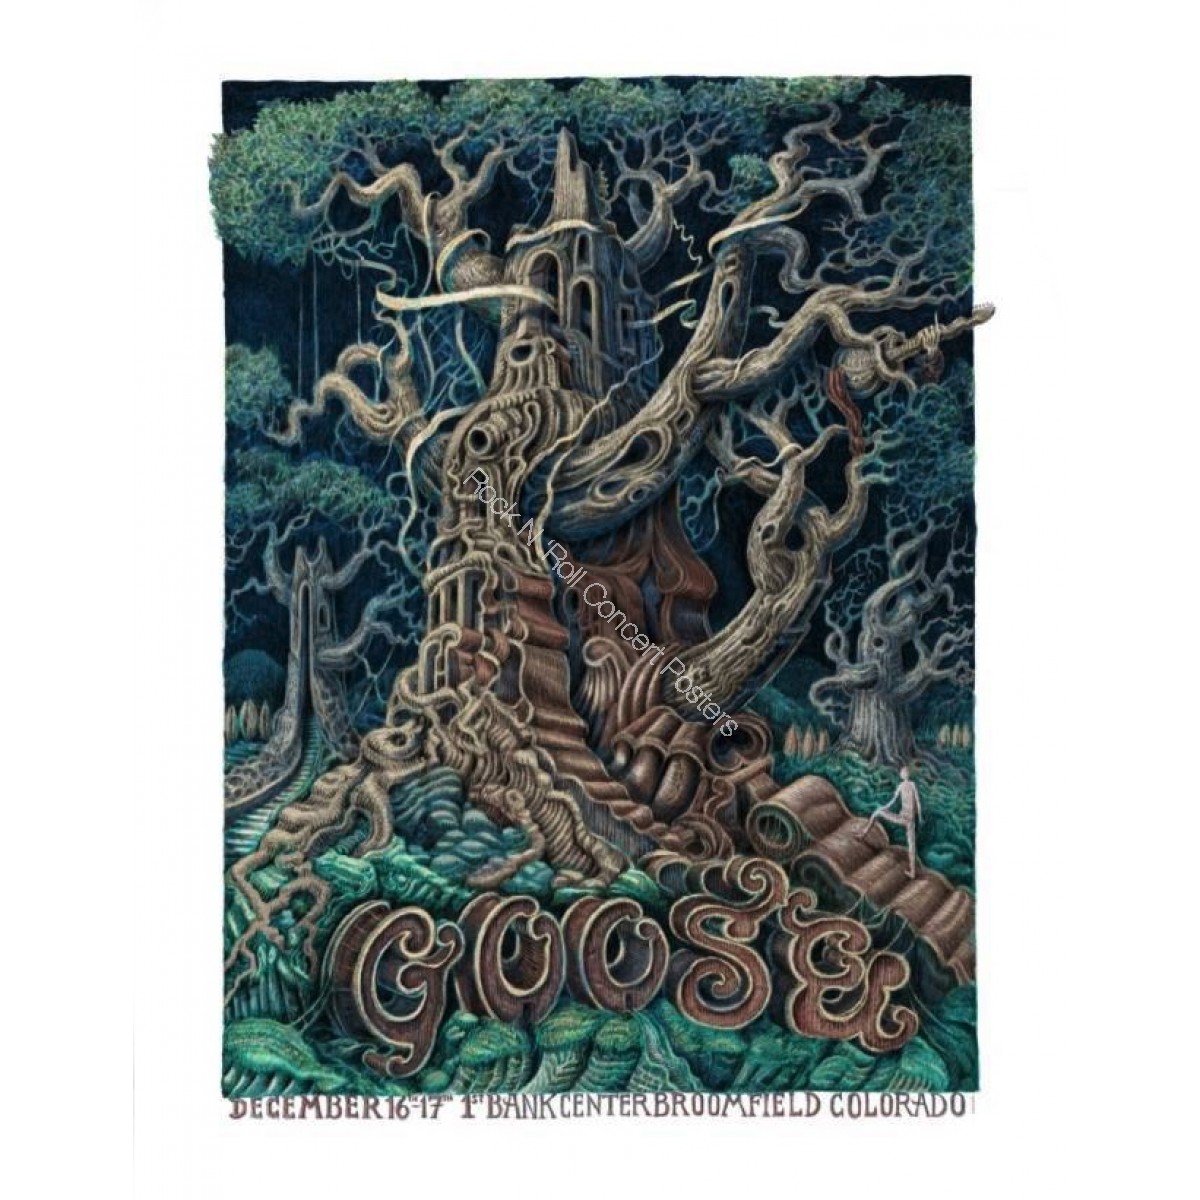 Goose @ The 1STBANK Center Broomfield/ Denver Colorado December 16th,17th 2022  Show Edition by David Welker